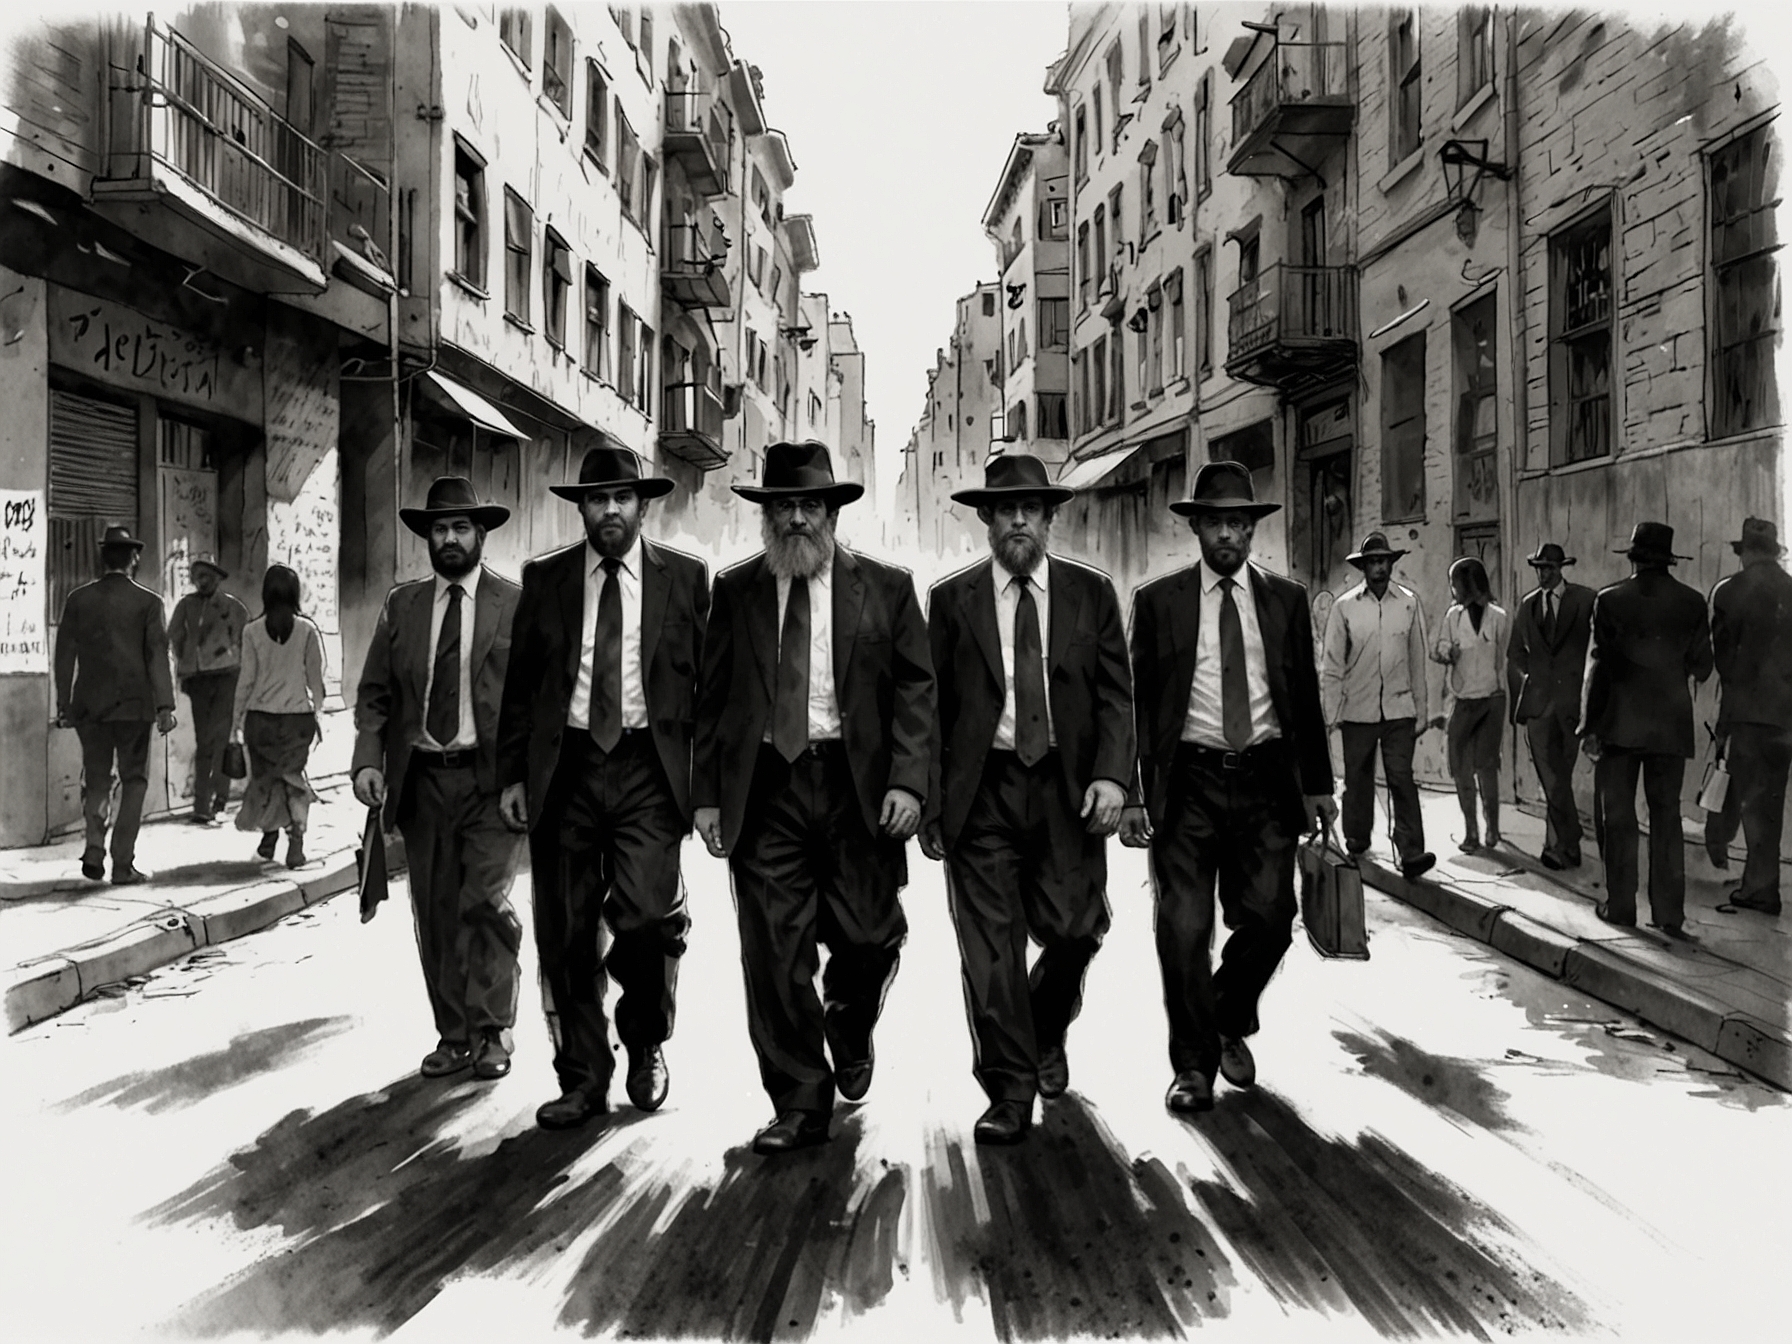 An image showing a group of Haredi men walking in a city, highlighting their distinct attire and community.